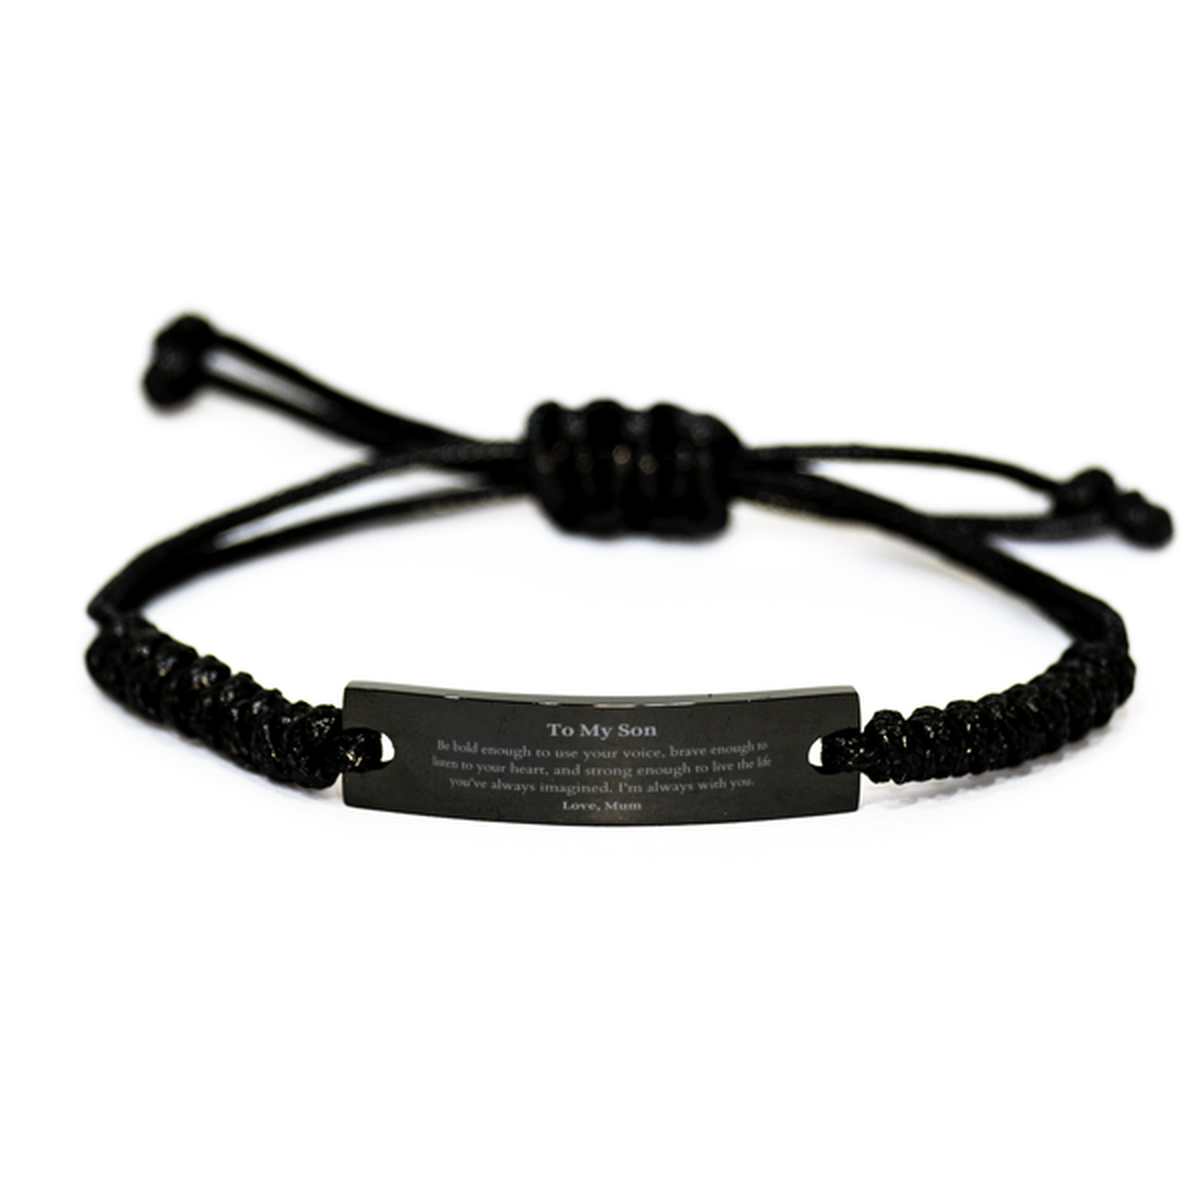 Keepsake Son Black Rope Bracelet Gift Idea Graduation Christmas Birthday Son from Mum, Son Be bold enough to use your voice, brave enough to listen to your heart. Love, Mum